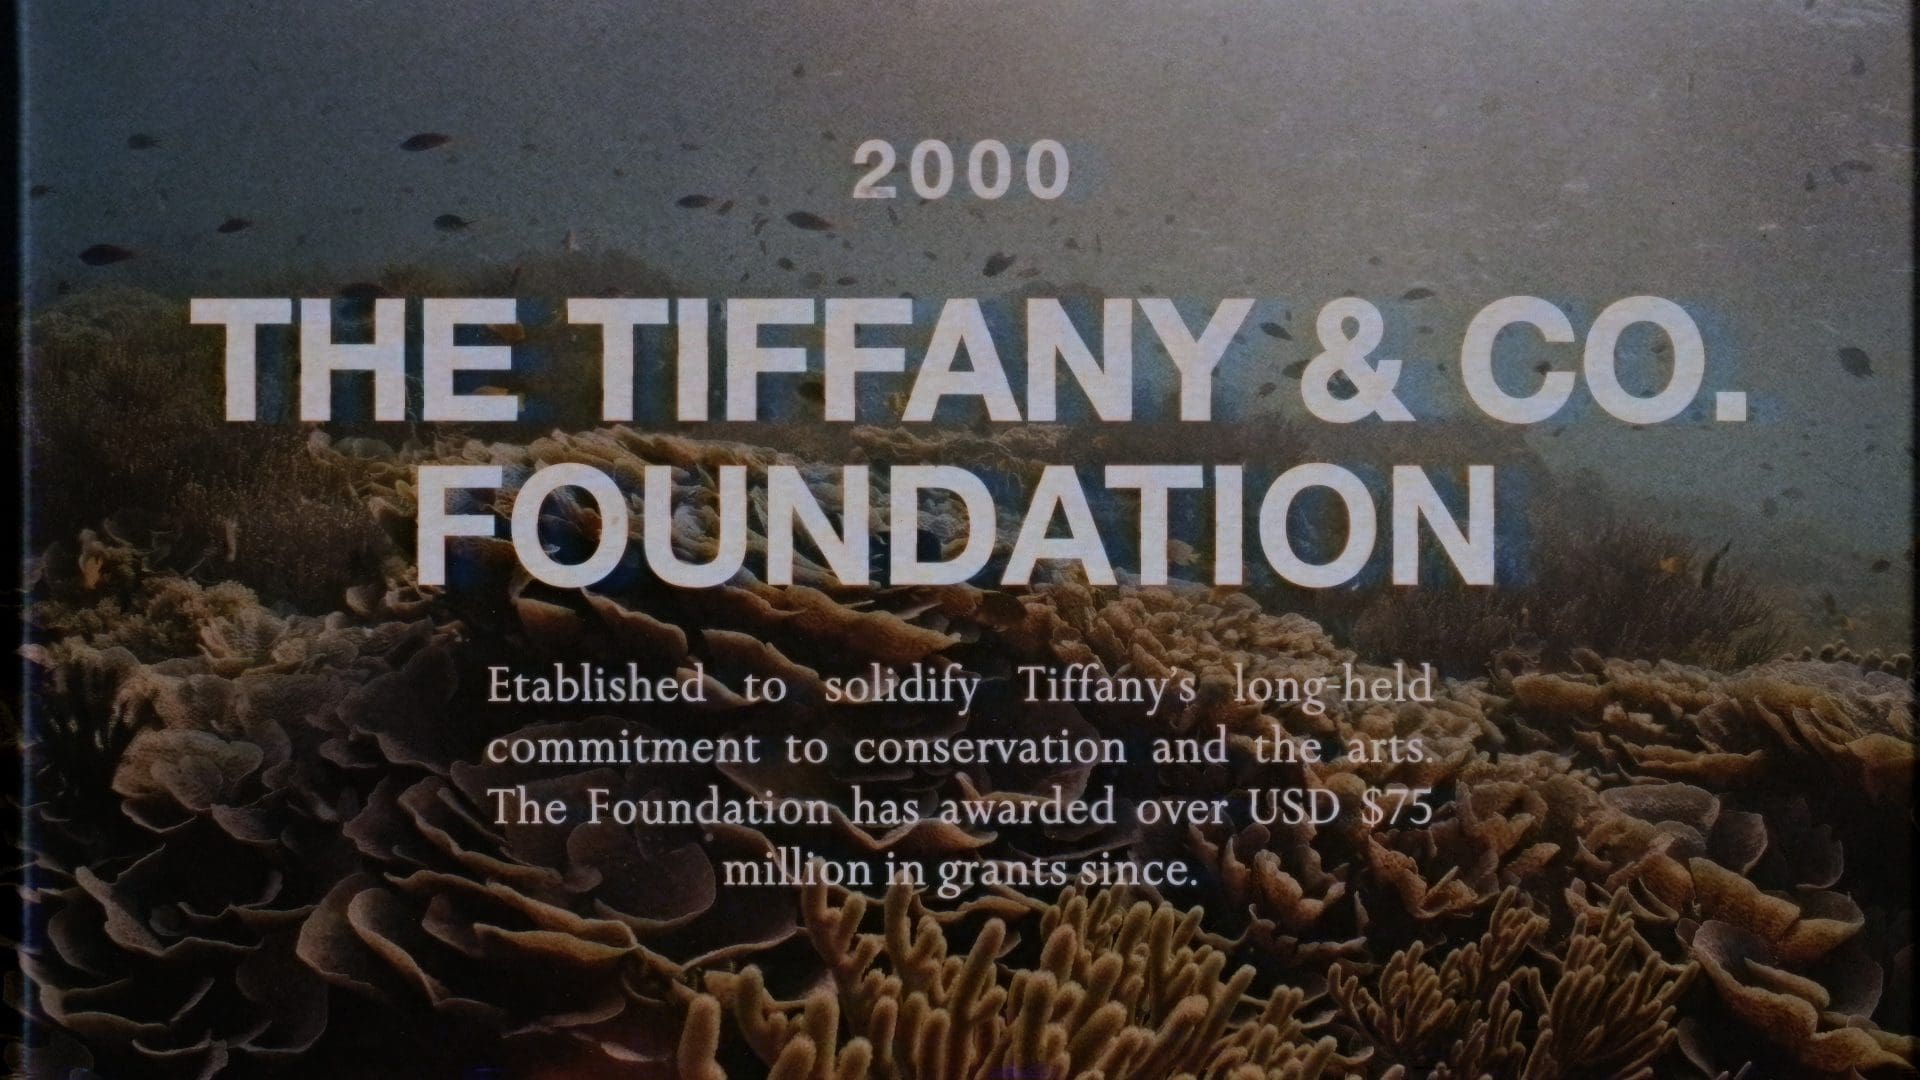 Promotional image for The Tiffany & Co. Foundation, established in 2000, highlighting its commitment to conservation and the arts, with over $75 million in grants awarded, set against a vibrant coral reef background.